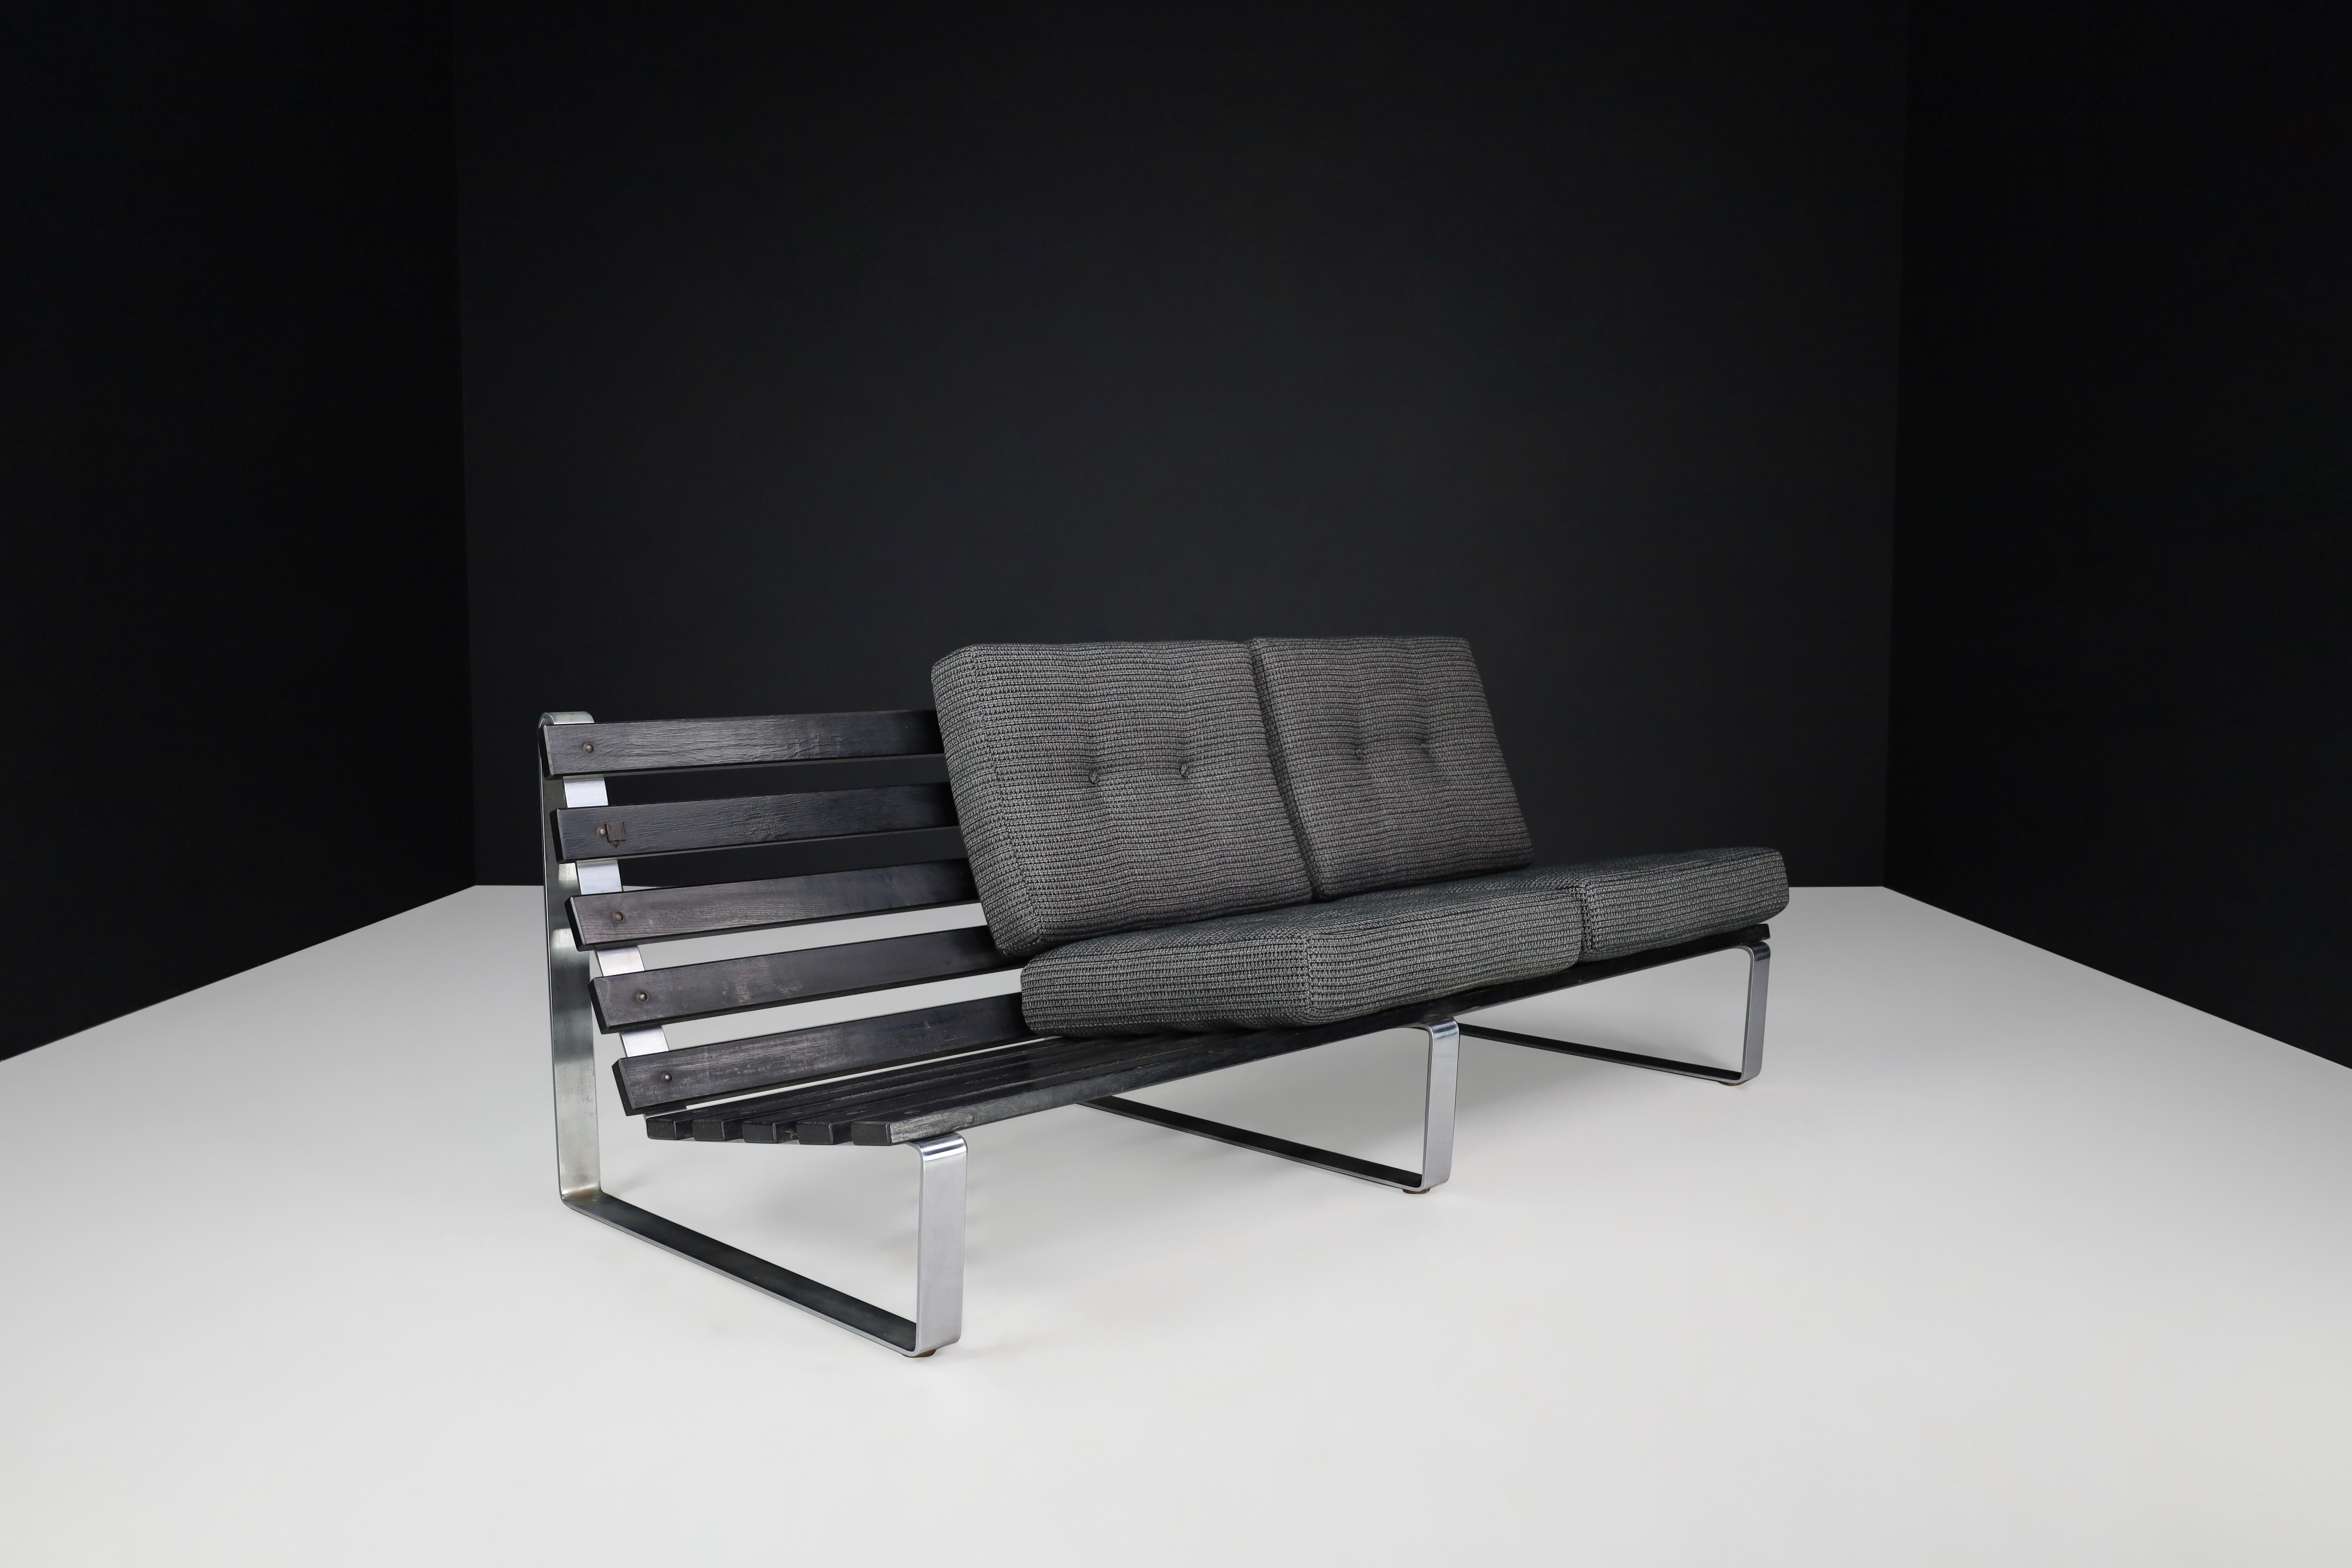  Kho Liang Ie for Artifort Bijenkorf Three-Seat Sofa Steel and Grey Upholstery In Good Condition For Sale In Almelo, NL